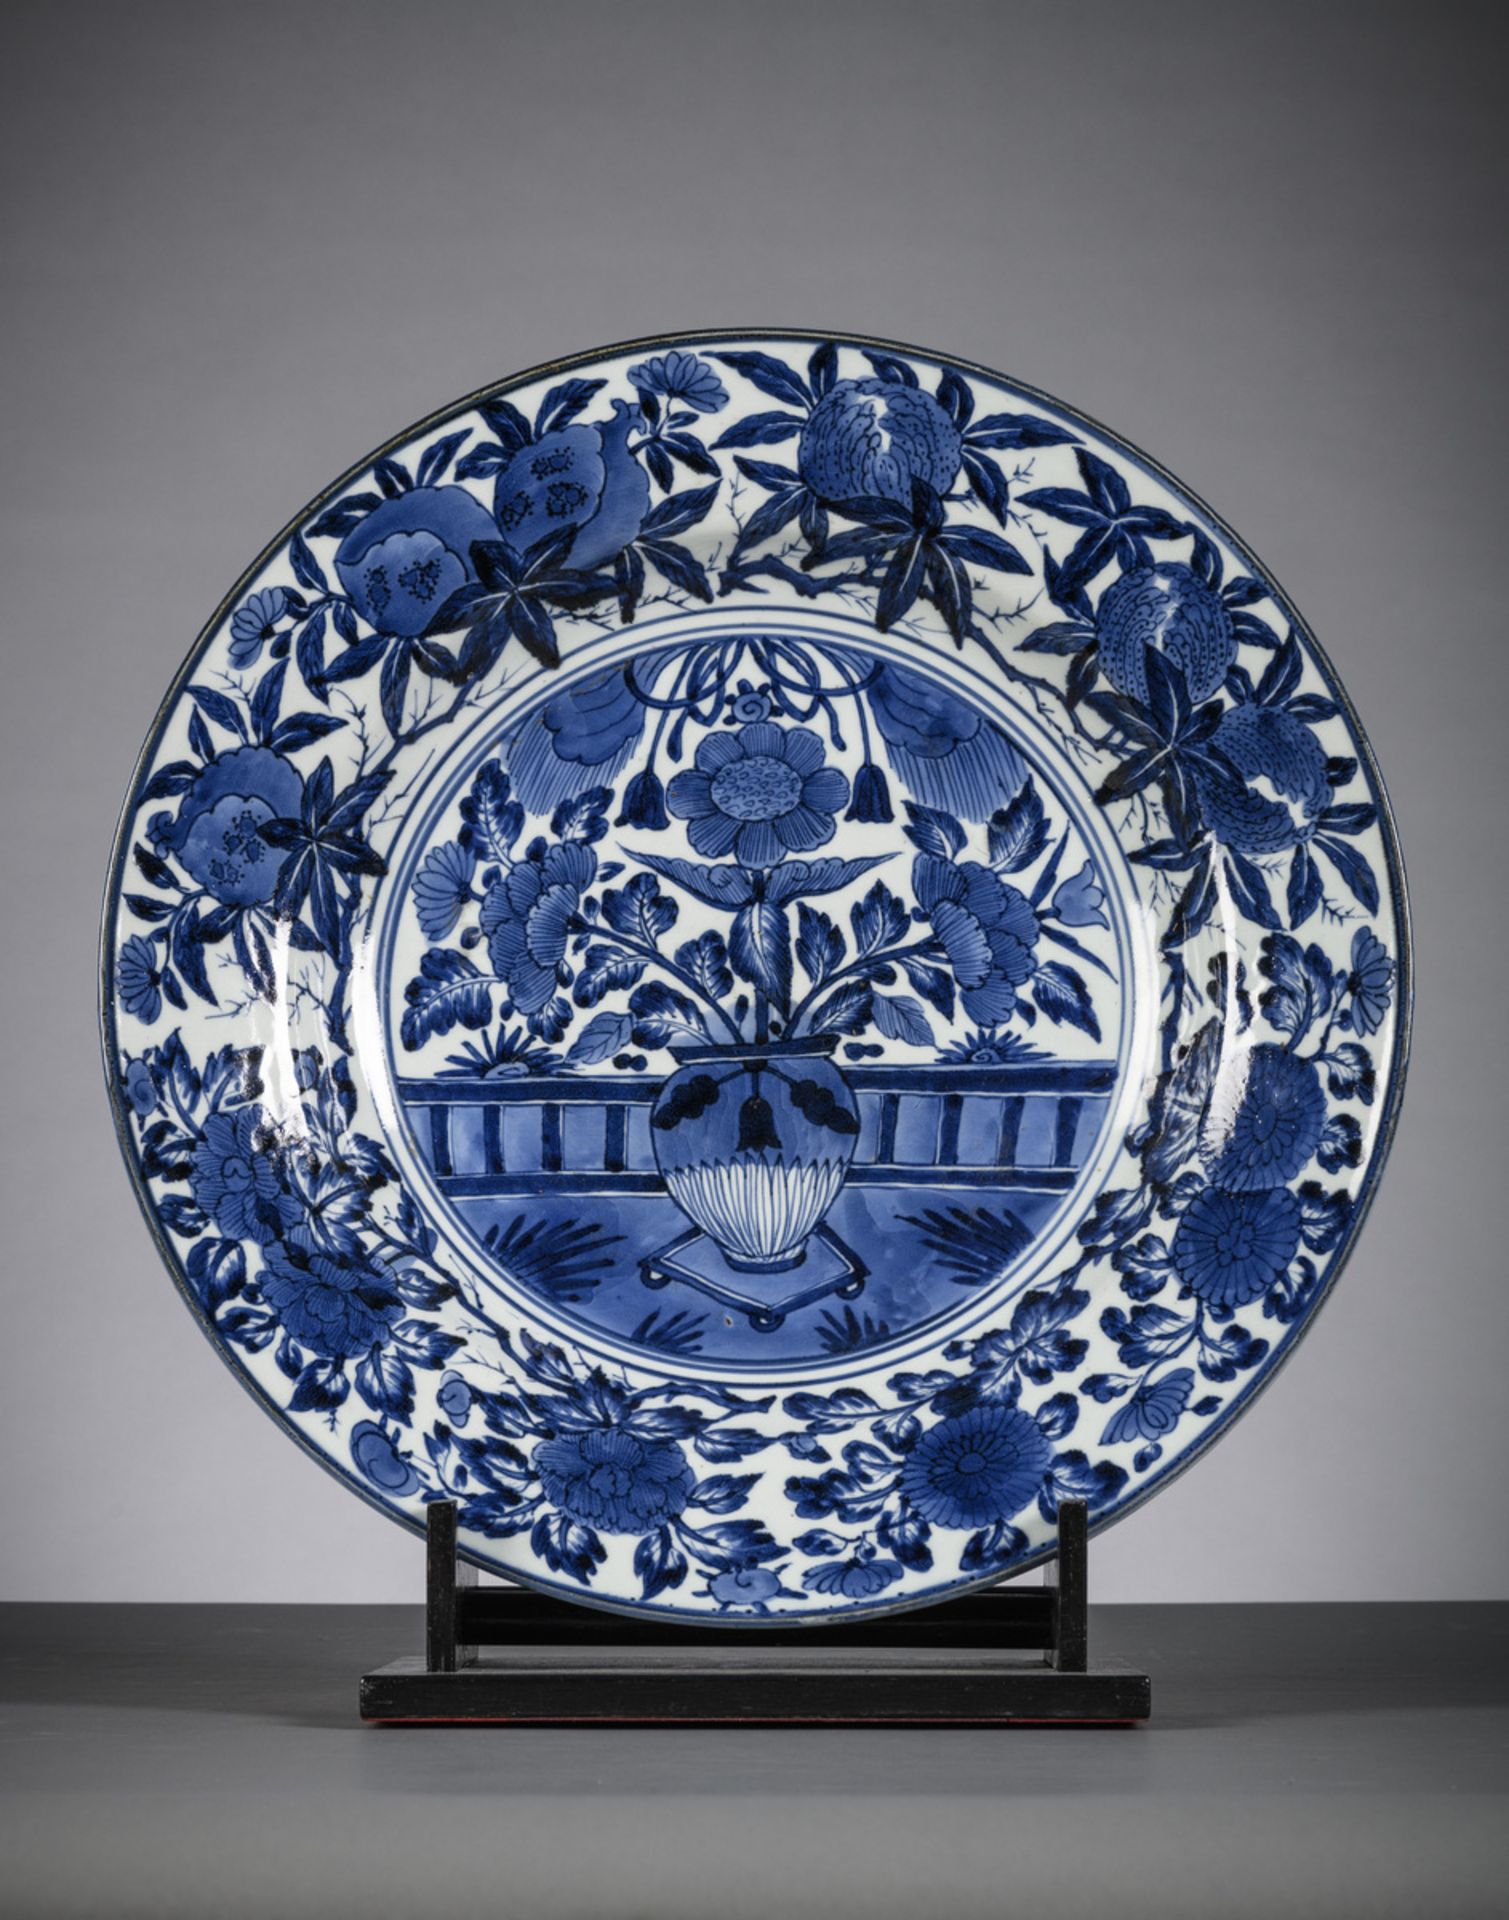 Exceptionally large dish in Japanese Arita porcelain, 17th/18th century (dia 55cm)